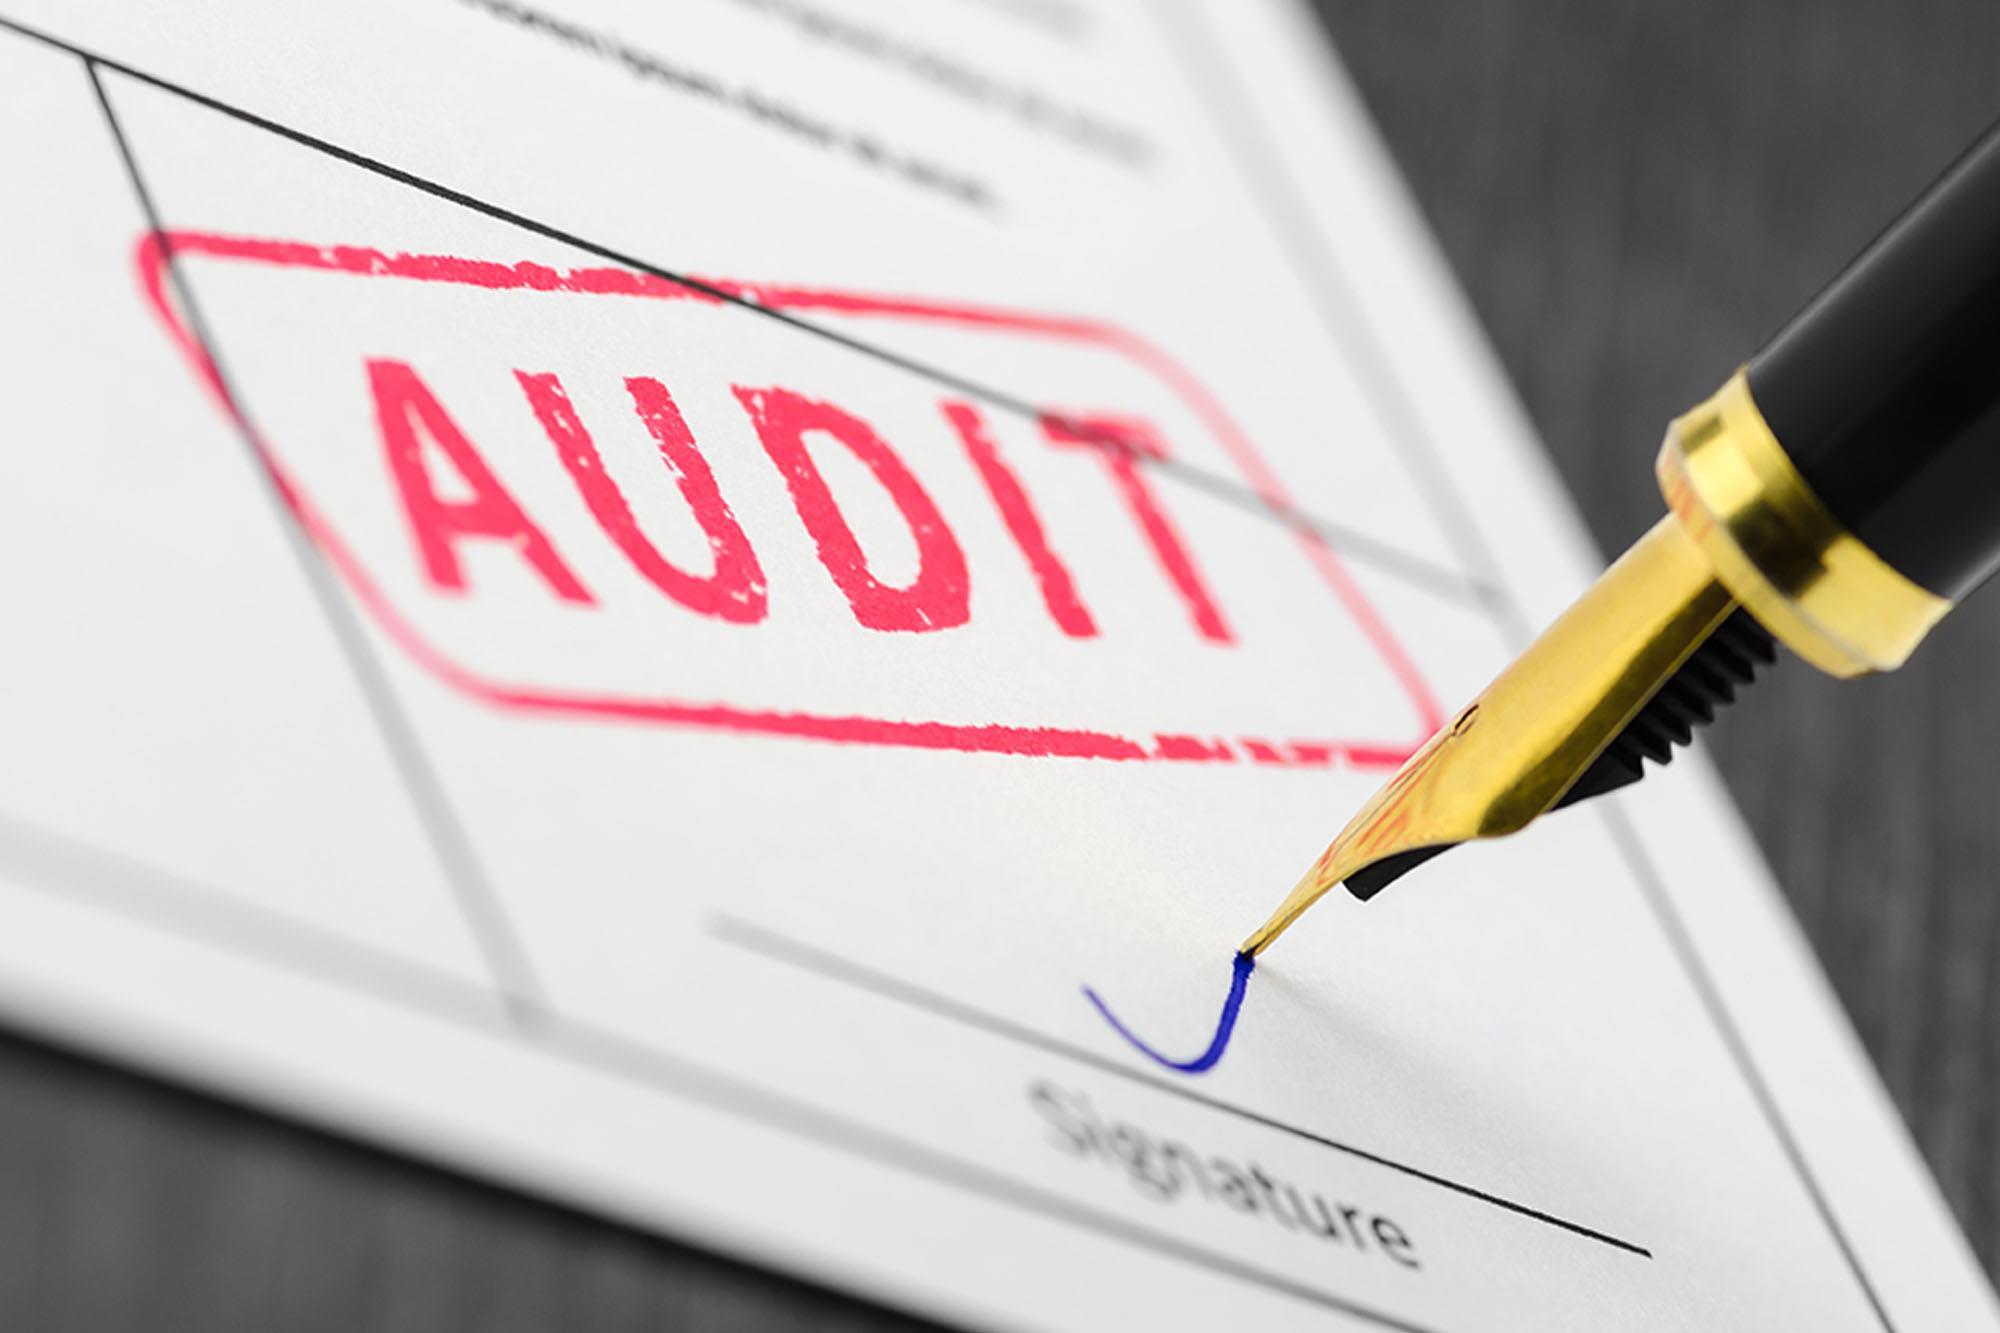 Audit Opinion and their Description